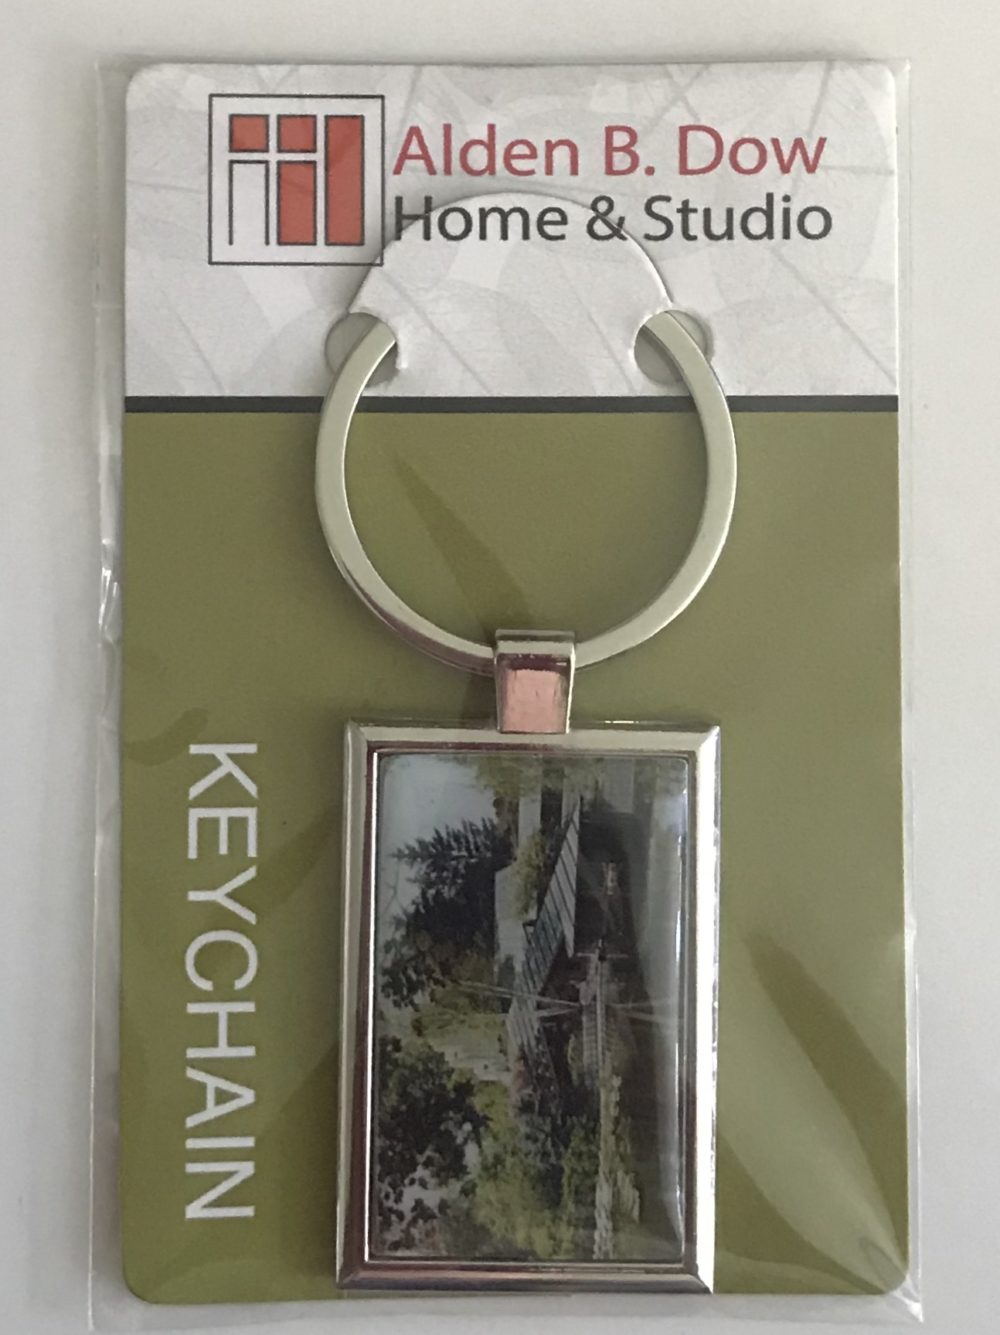 The Alden B. Dow Home and Studio Submarine Room Keychain